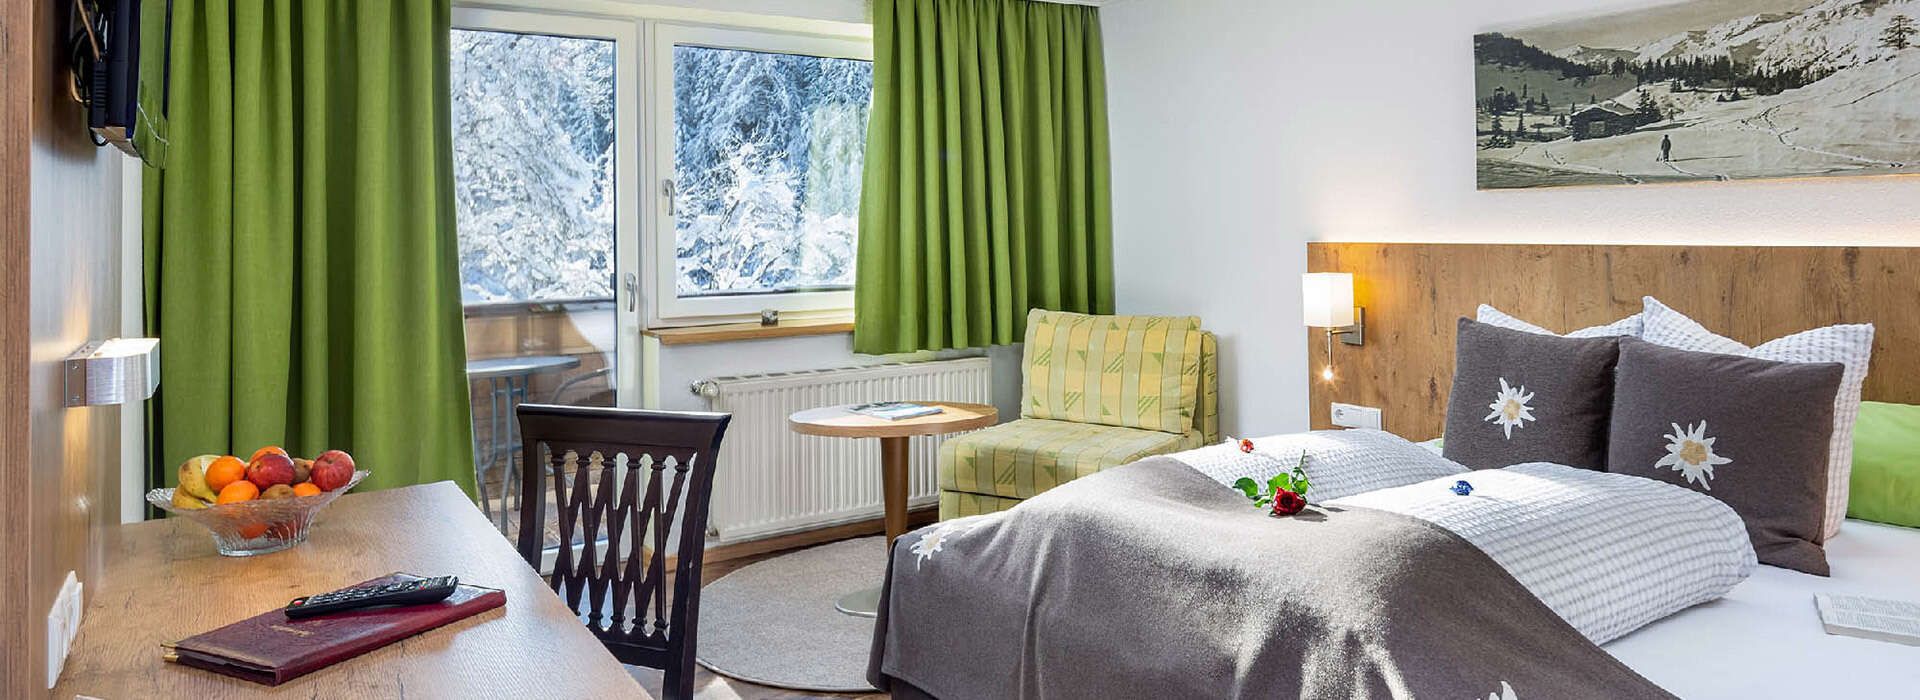 Triple room in the Hotel Schlossberg